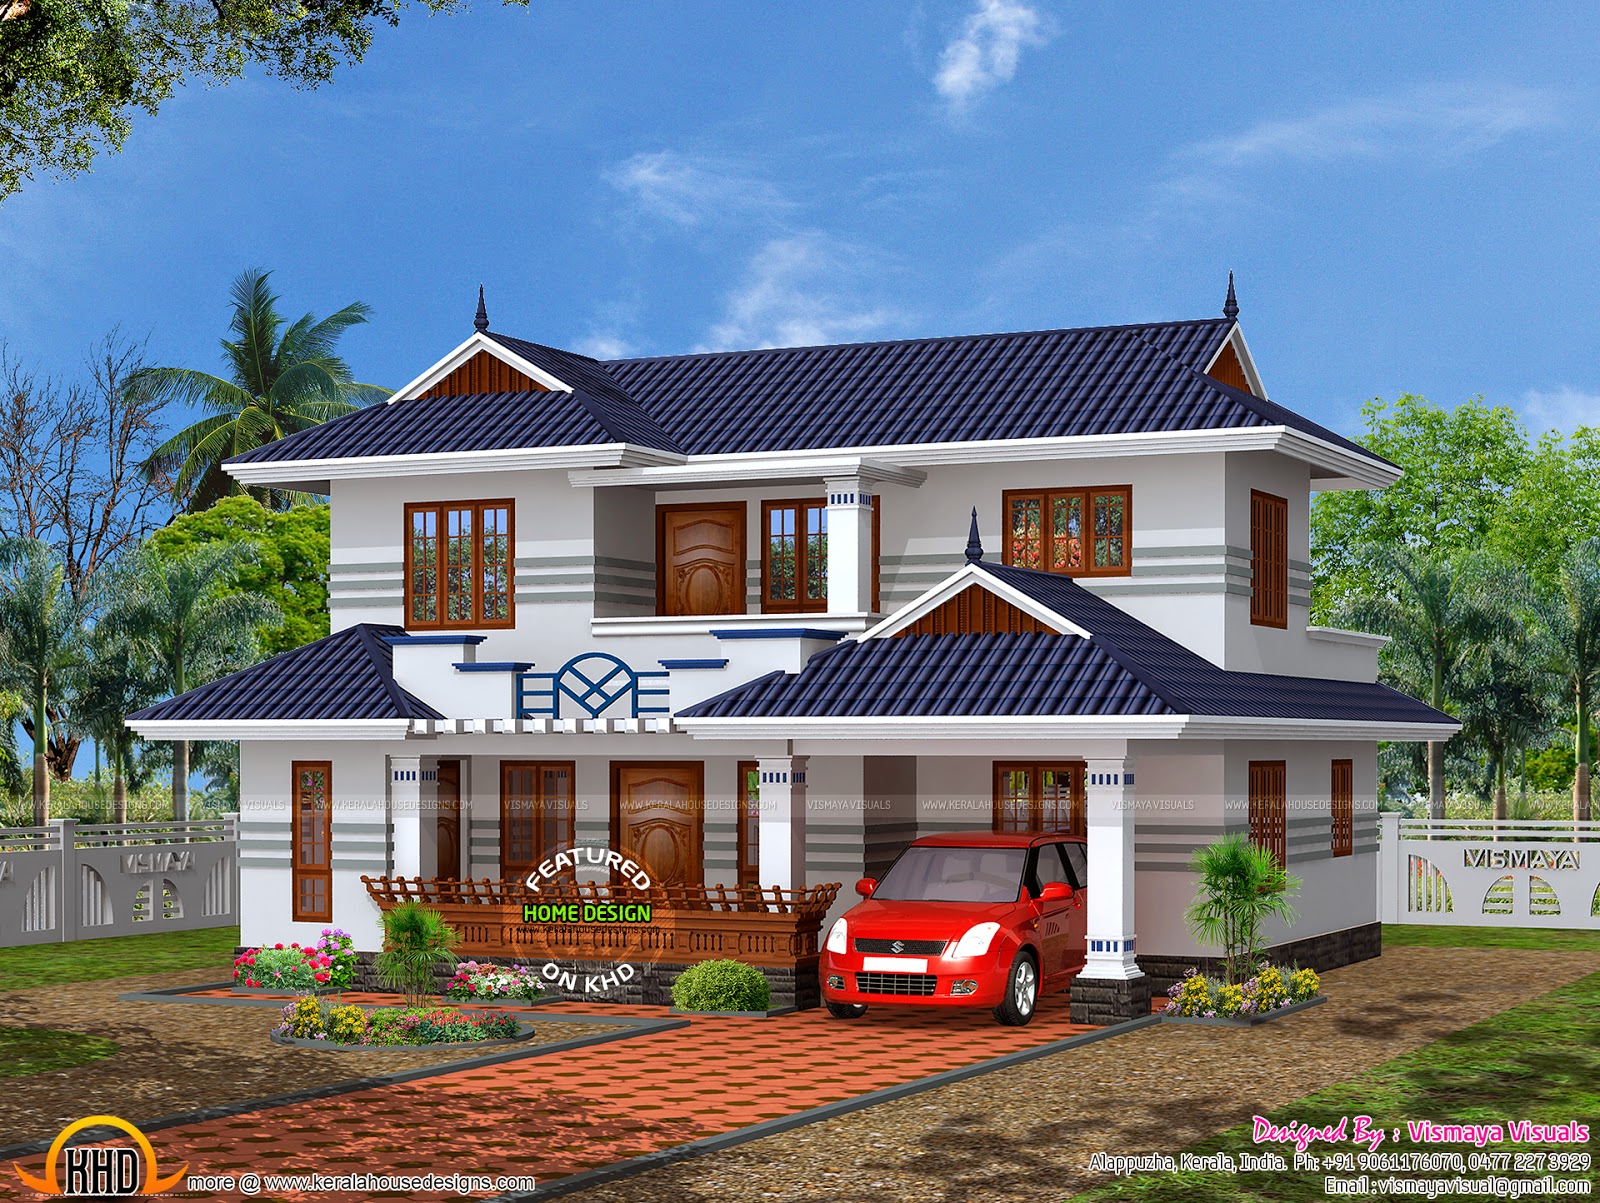 Typical Kerala house plan - Kerala home design and floor plans